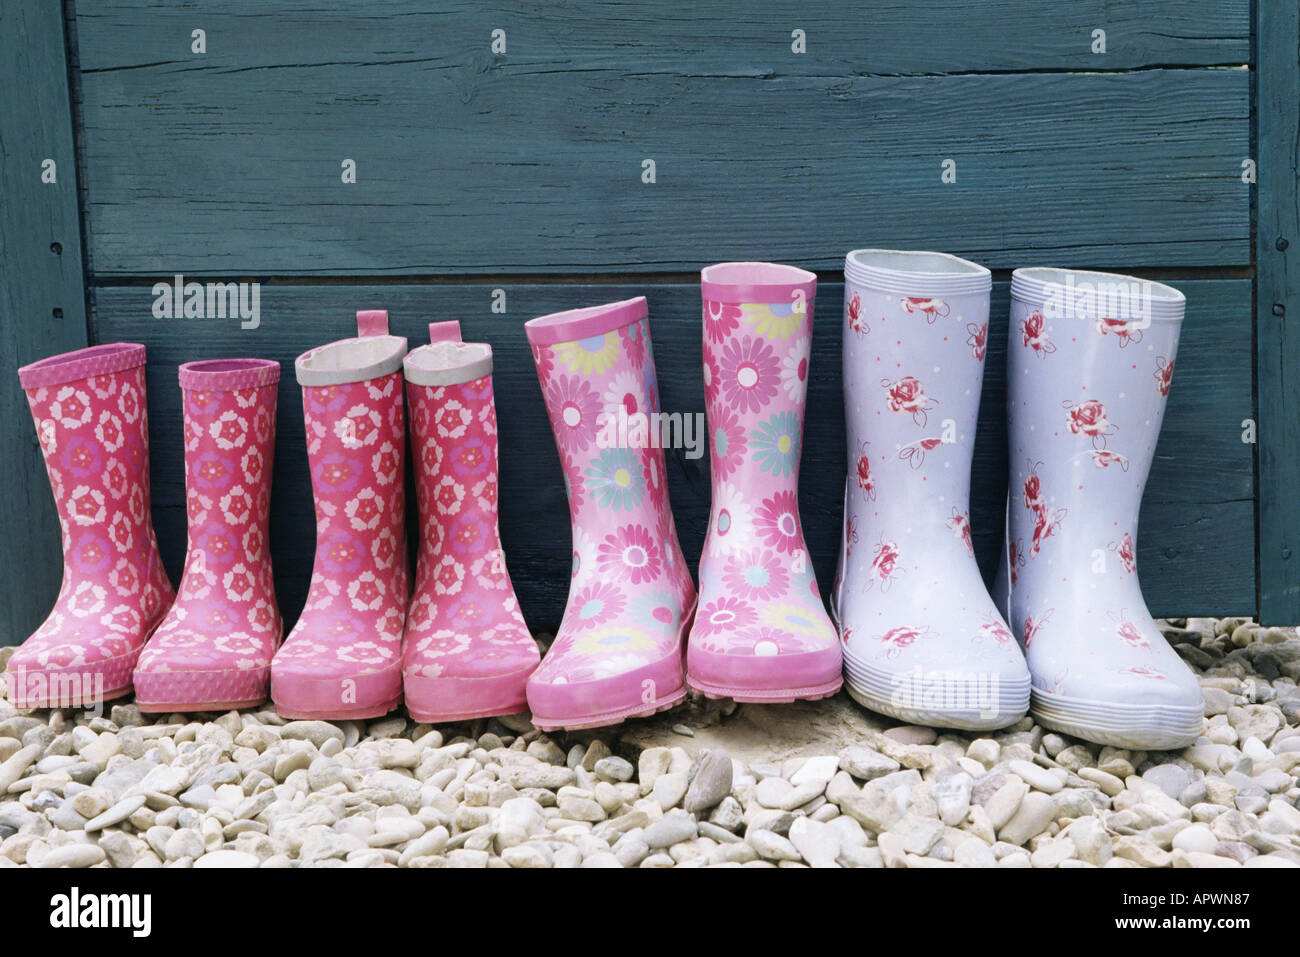 Row of rubber boots Stock Photo - Alamy